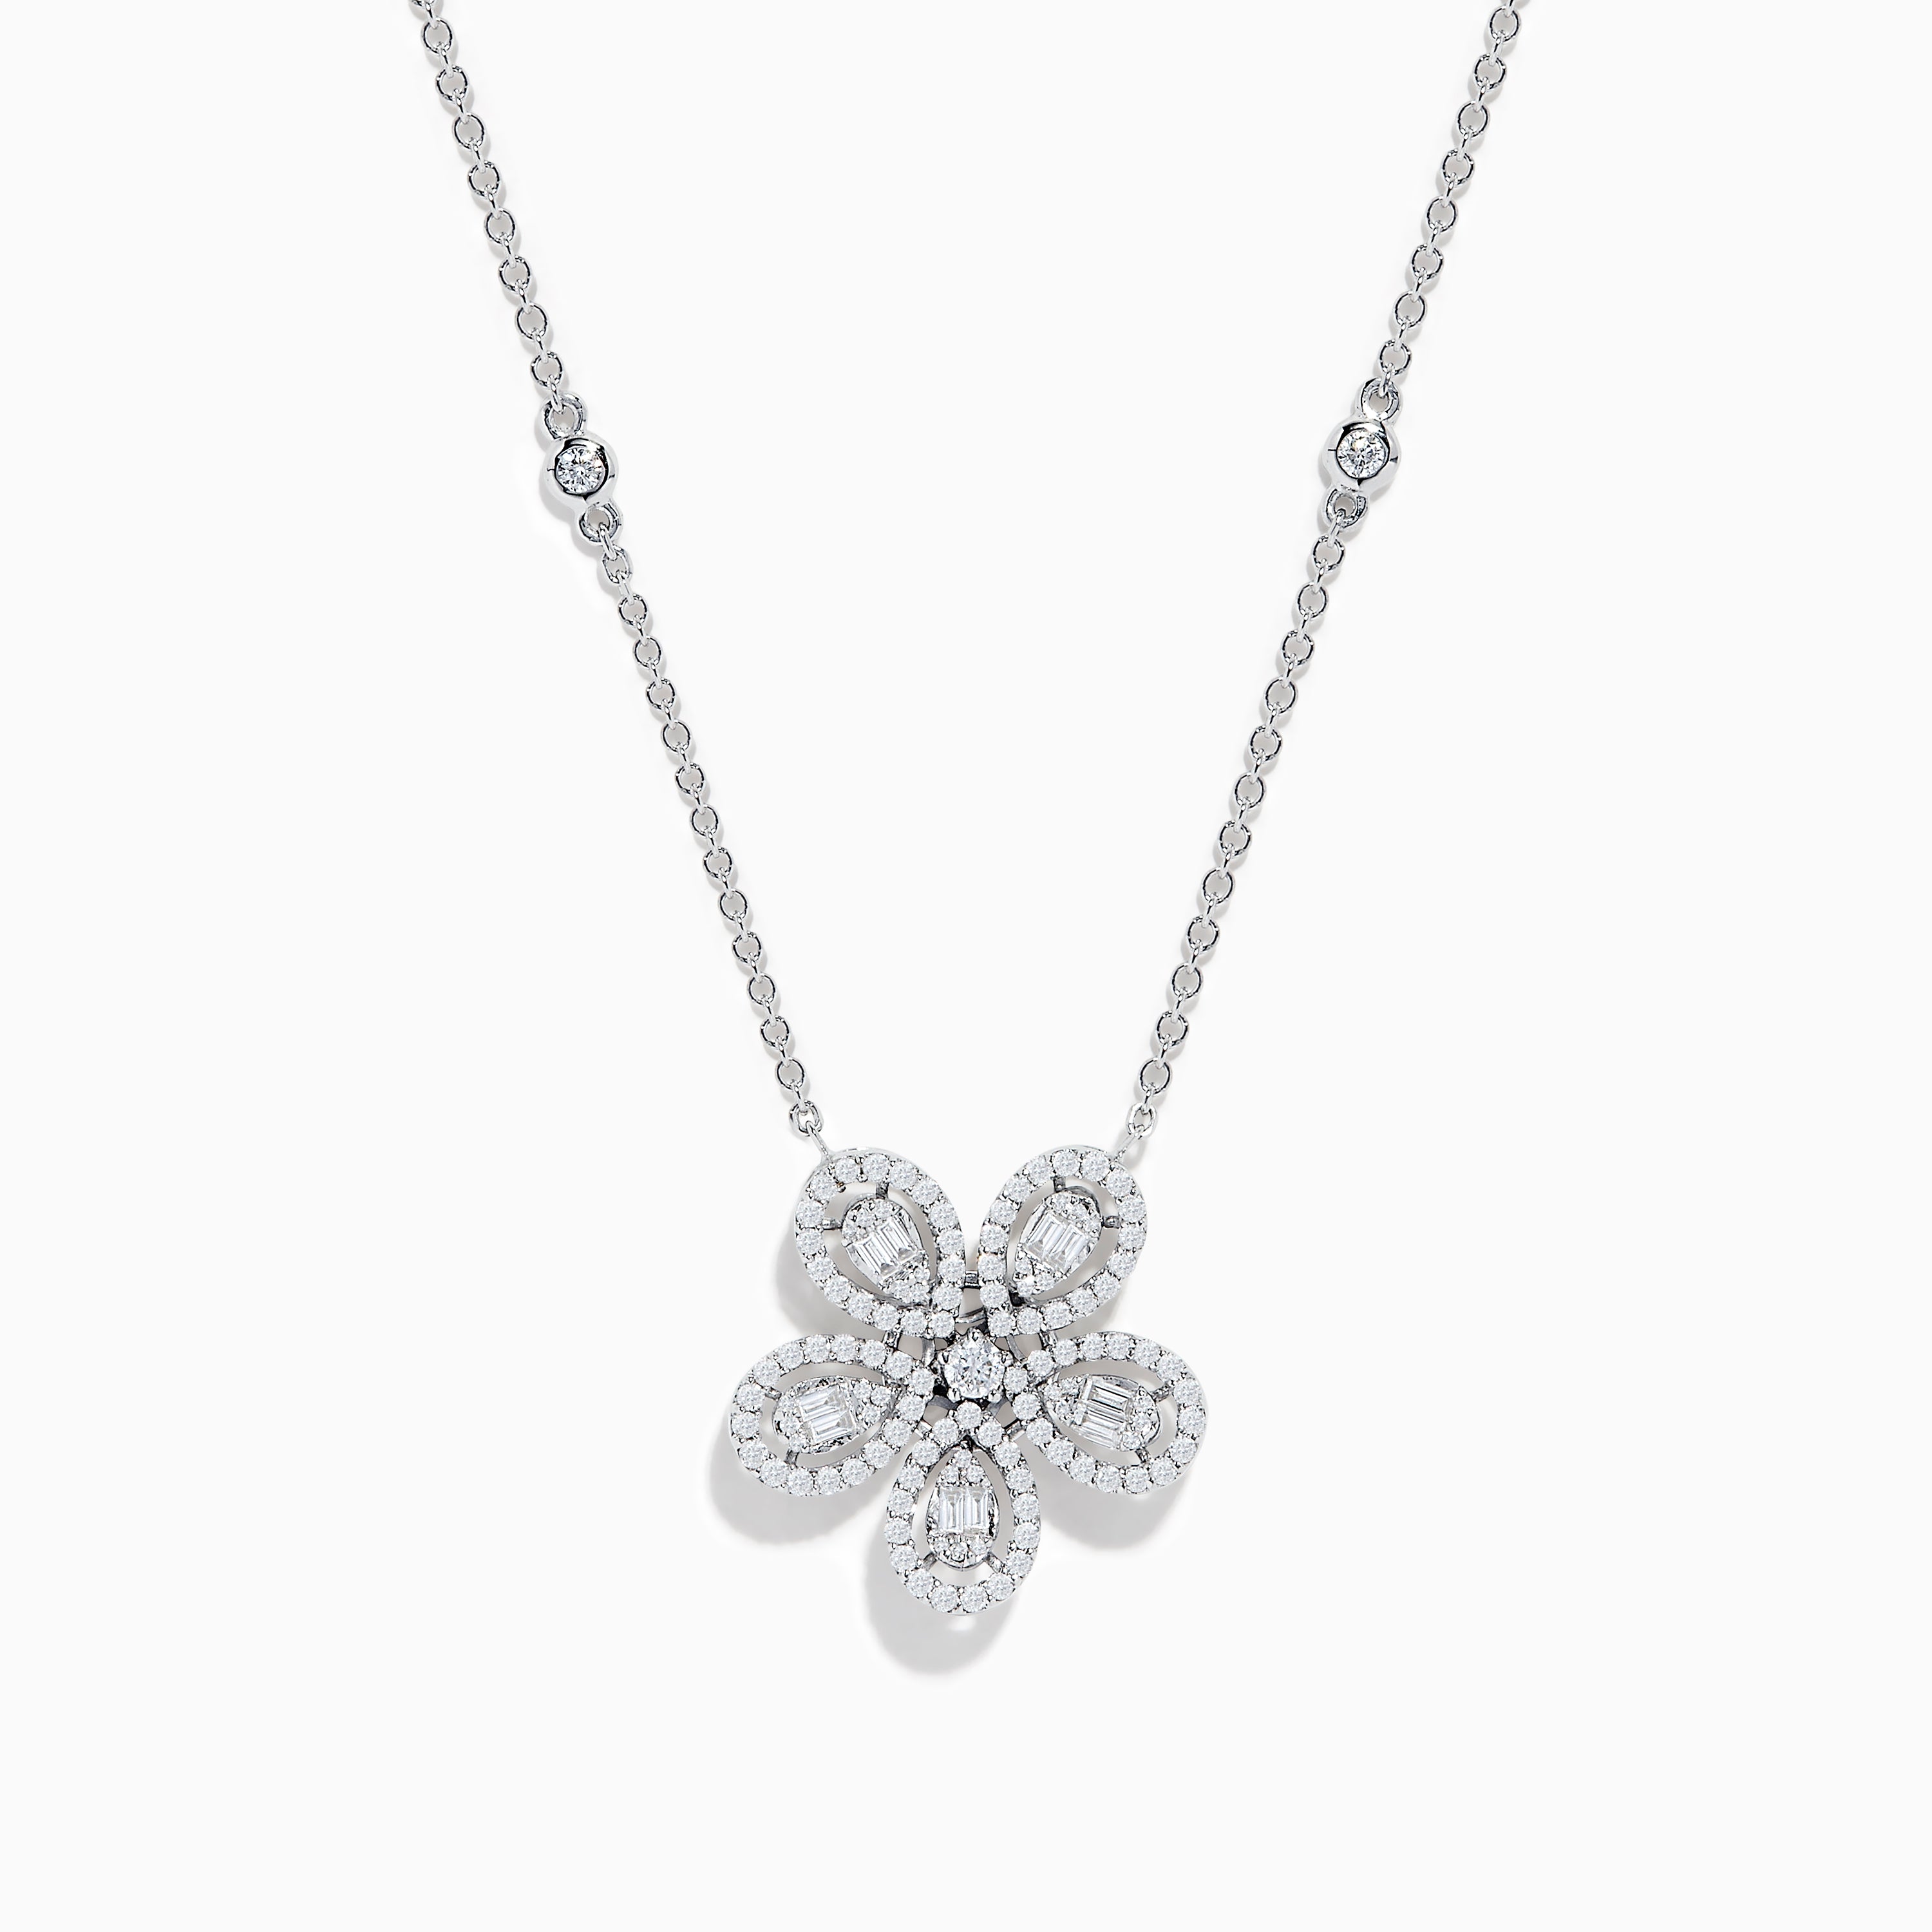 Floral Metal Detailed Necklace - Off White, Gold